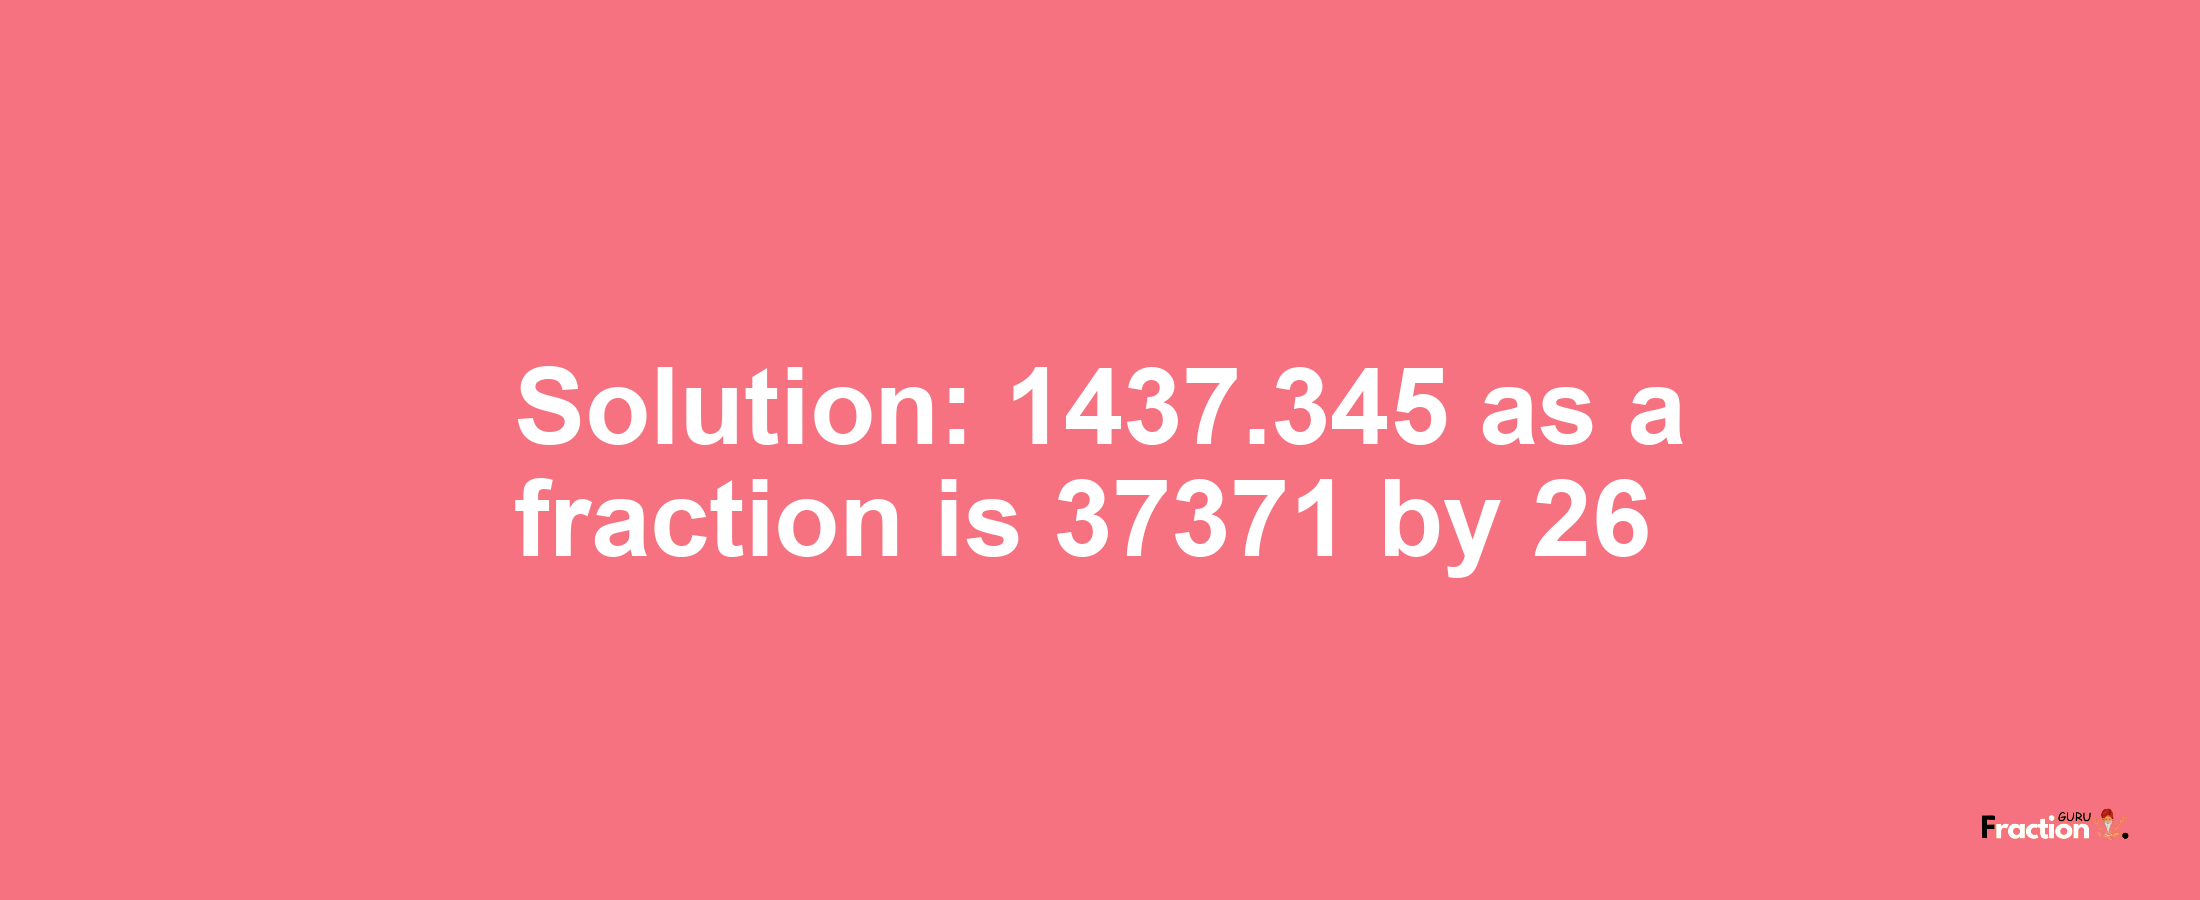 Solution:1437.345 as a fraction is 37371/26